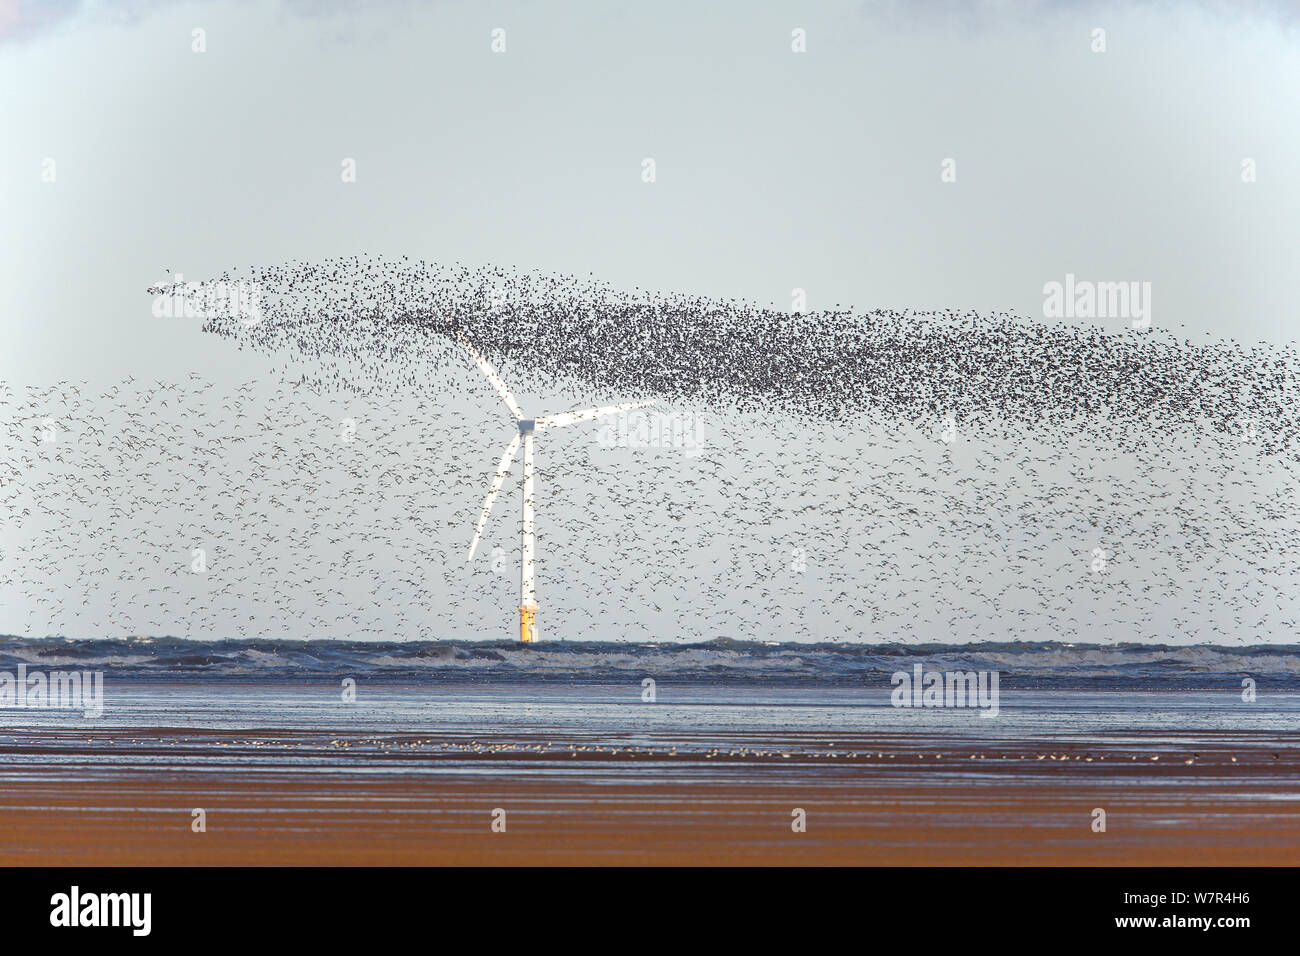 Knot (Calidris canutus) flocks in flight over Liverpool Bay with wind turbine in the background Liverpool Bay, UK, November Stock Photo